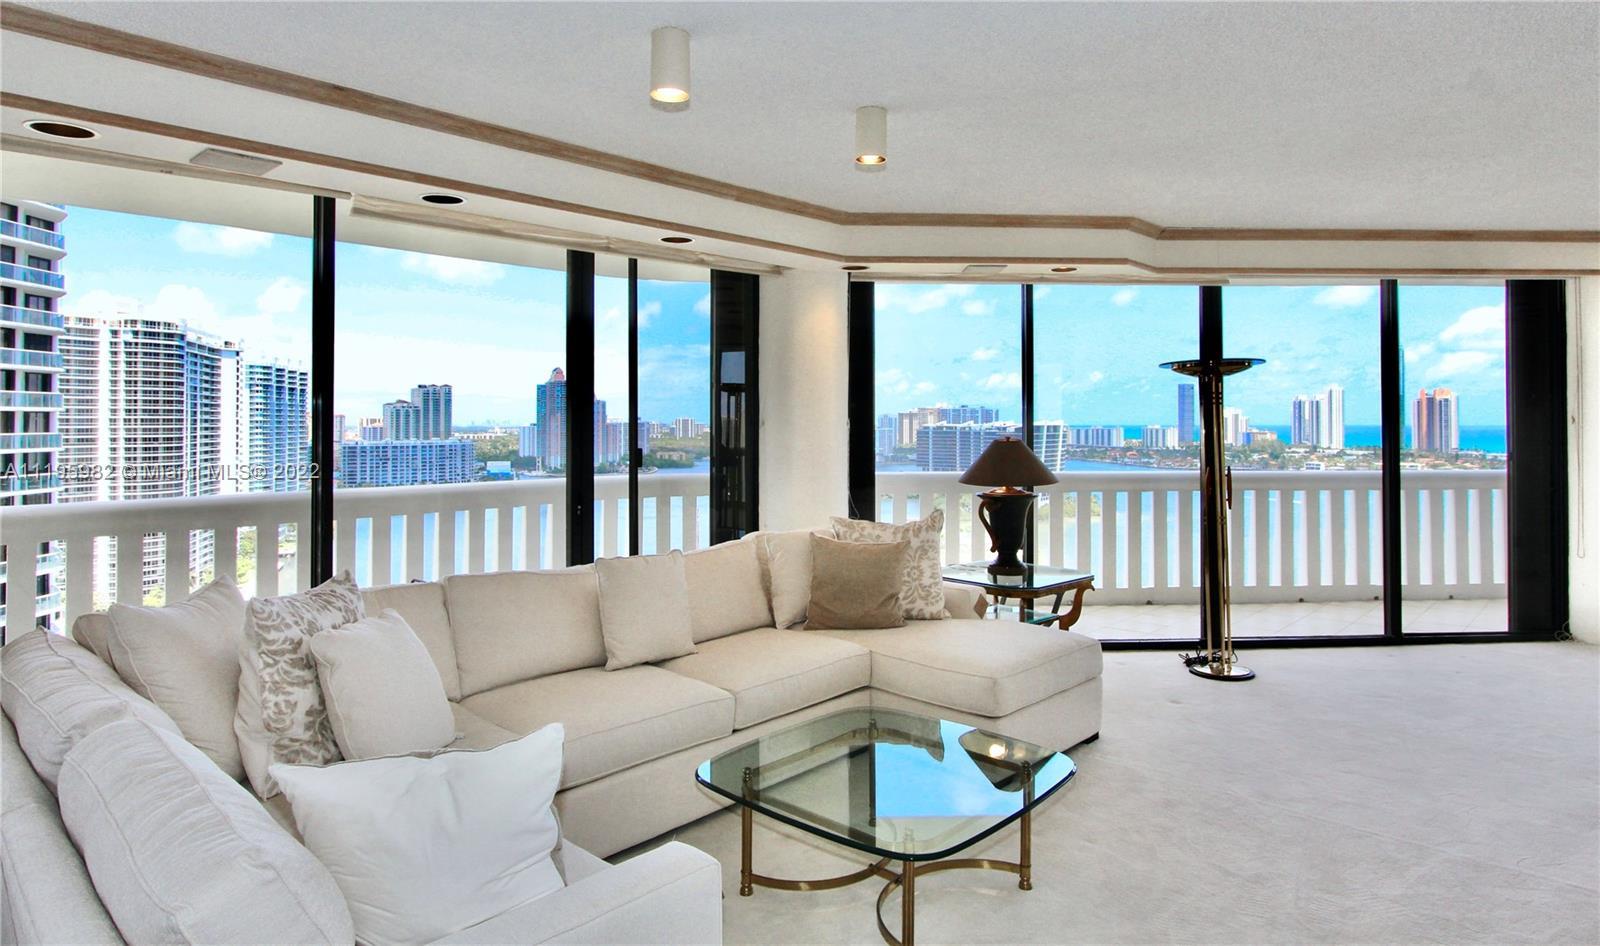 SPECTACULAR VIEWS TO THE INTRACOASTAL AND OCEAN FROM THIS HIGH FLOOR 2 BEDROOM + DEN/3 FULL BATHROOM